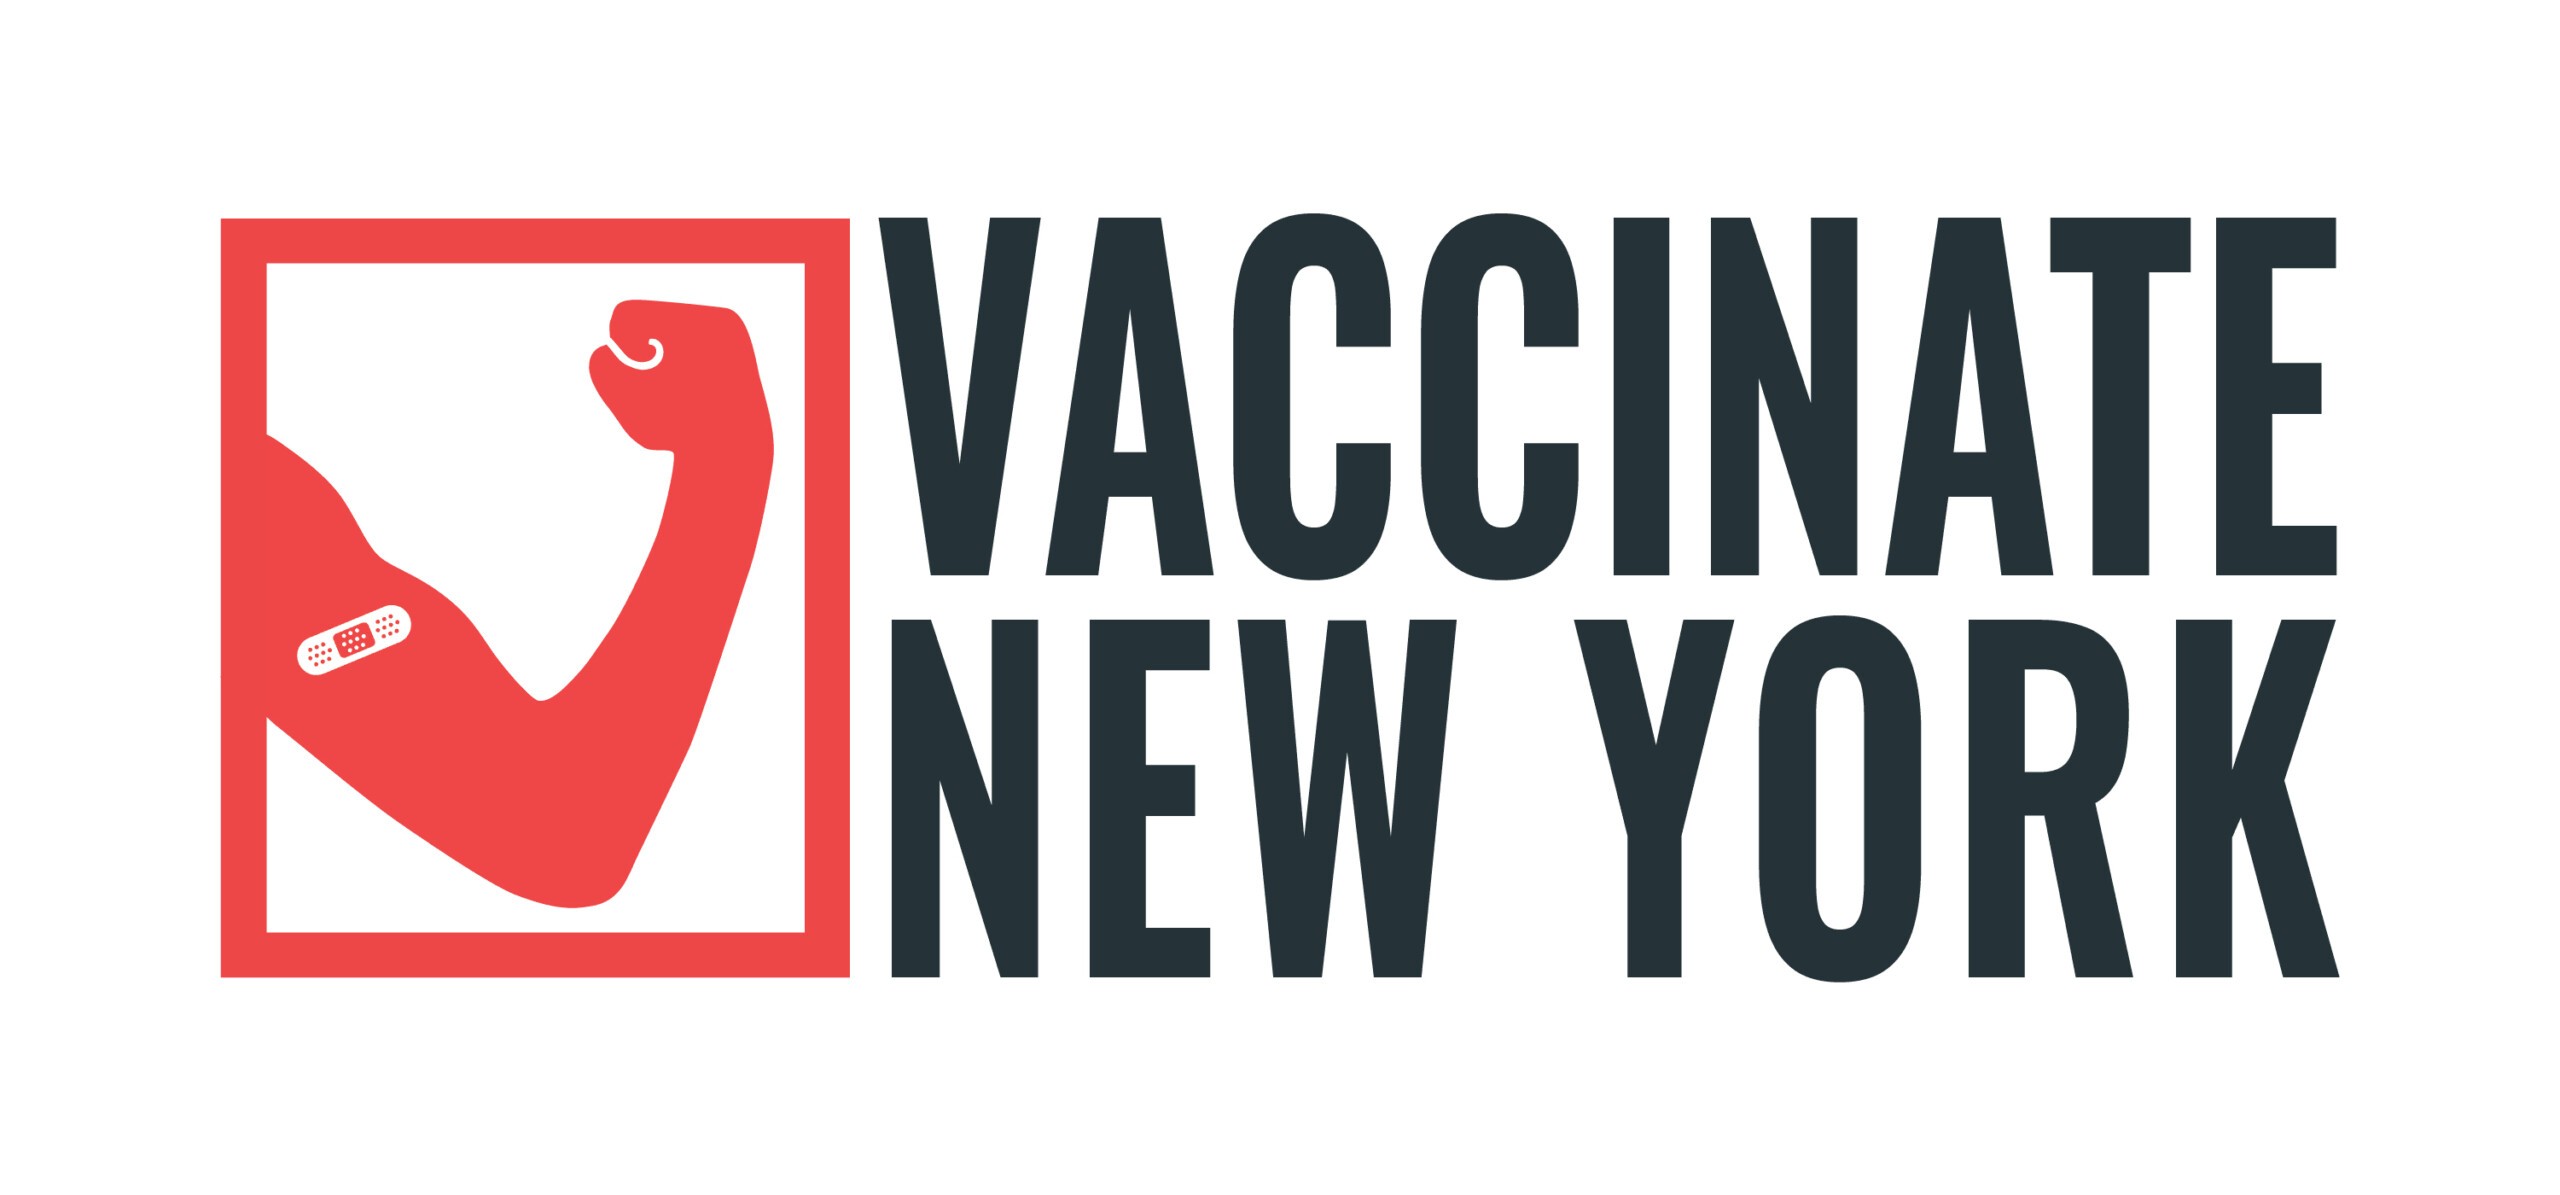 NYC Landmarks Turned COVID-19 Vaccination Centers